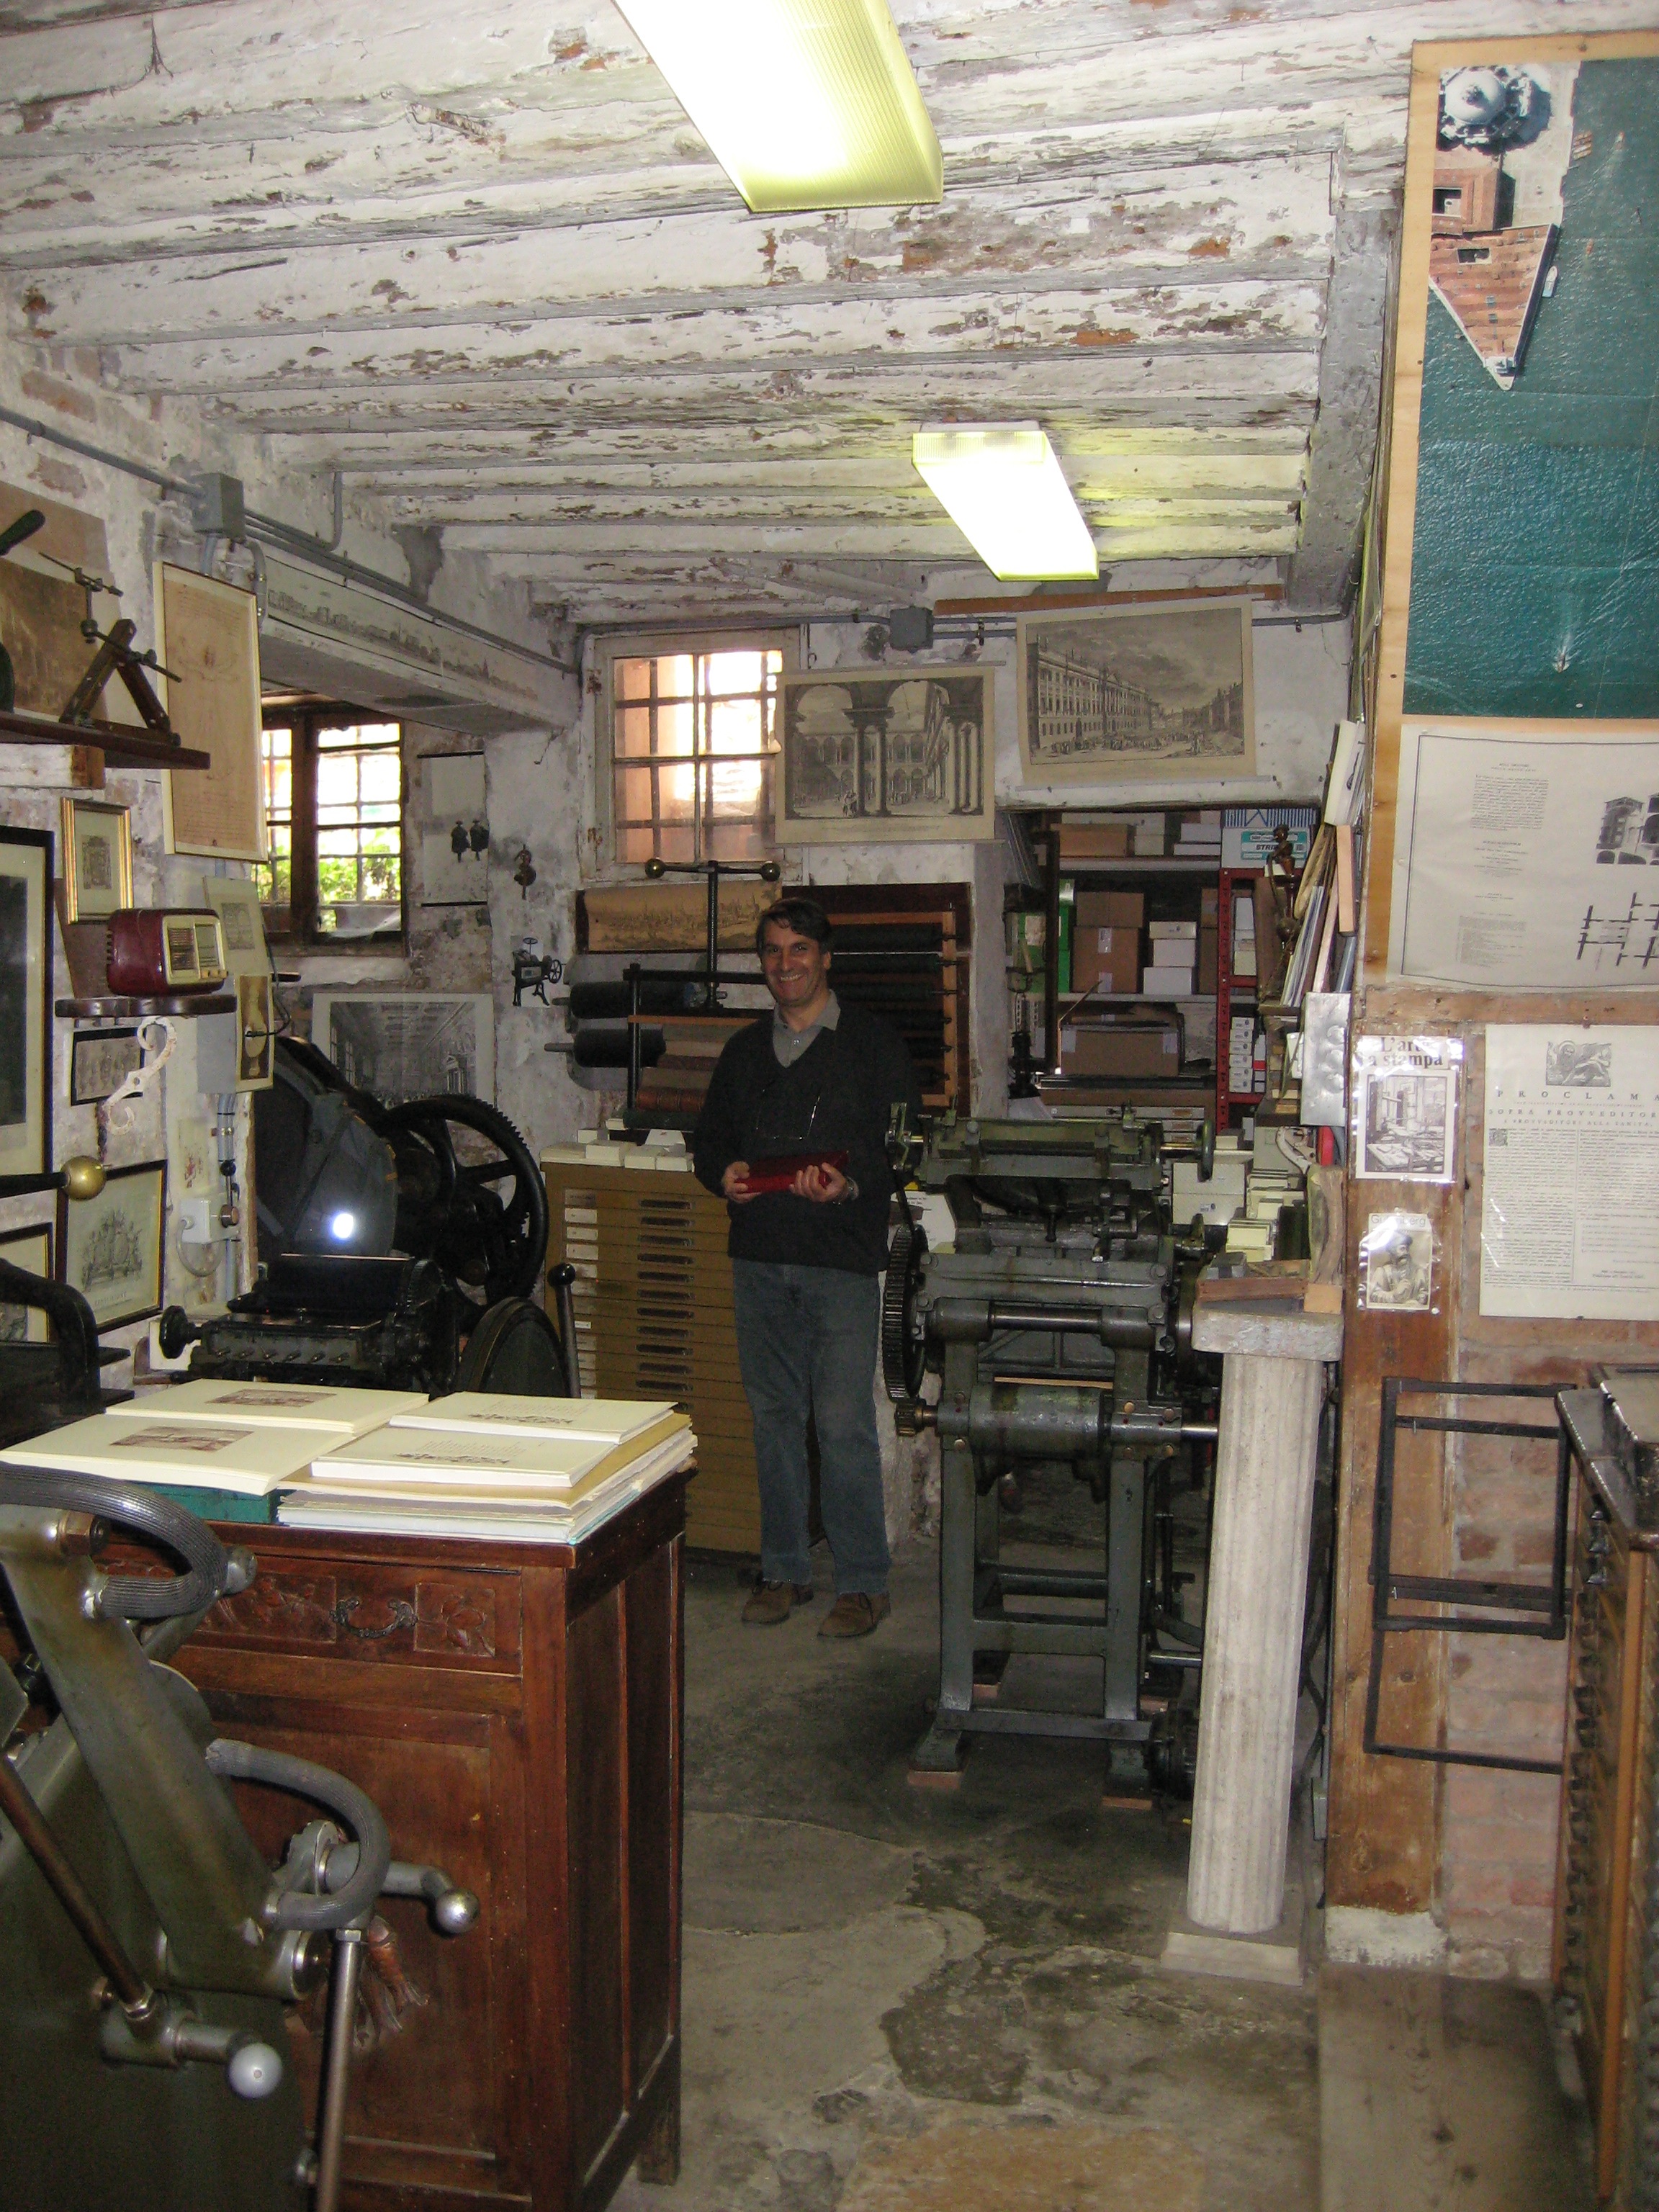 Gianni Basso, the Only Letterpress Printer in Venice